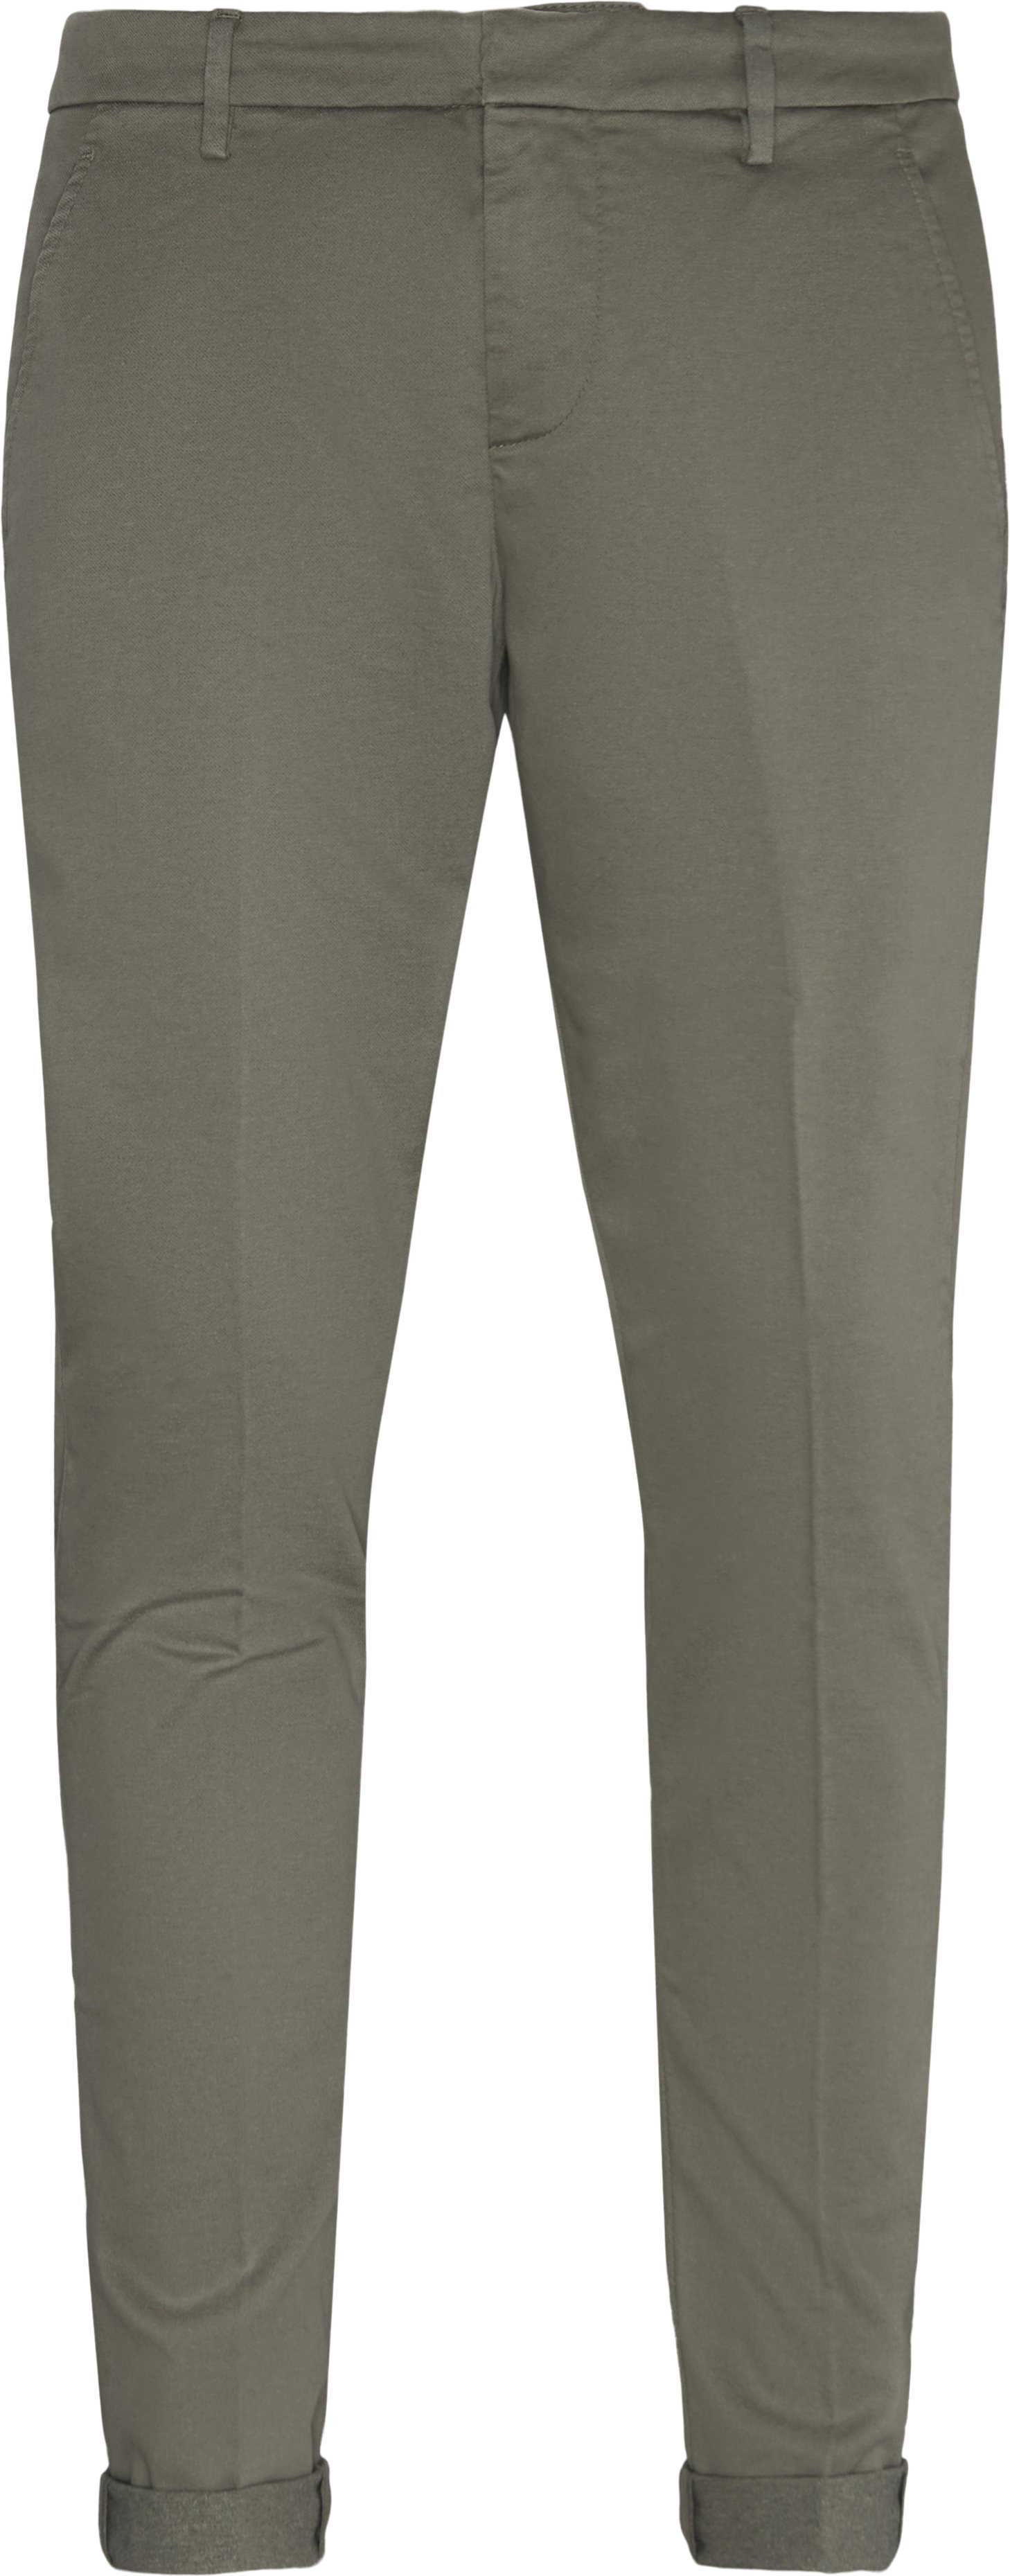 Chinos - Trousers - Slim fit - Sand